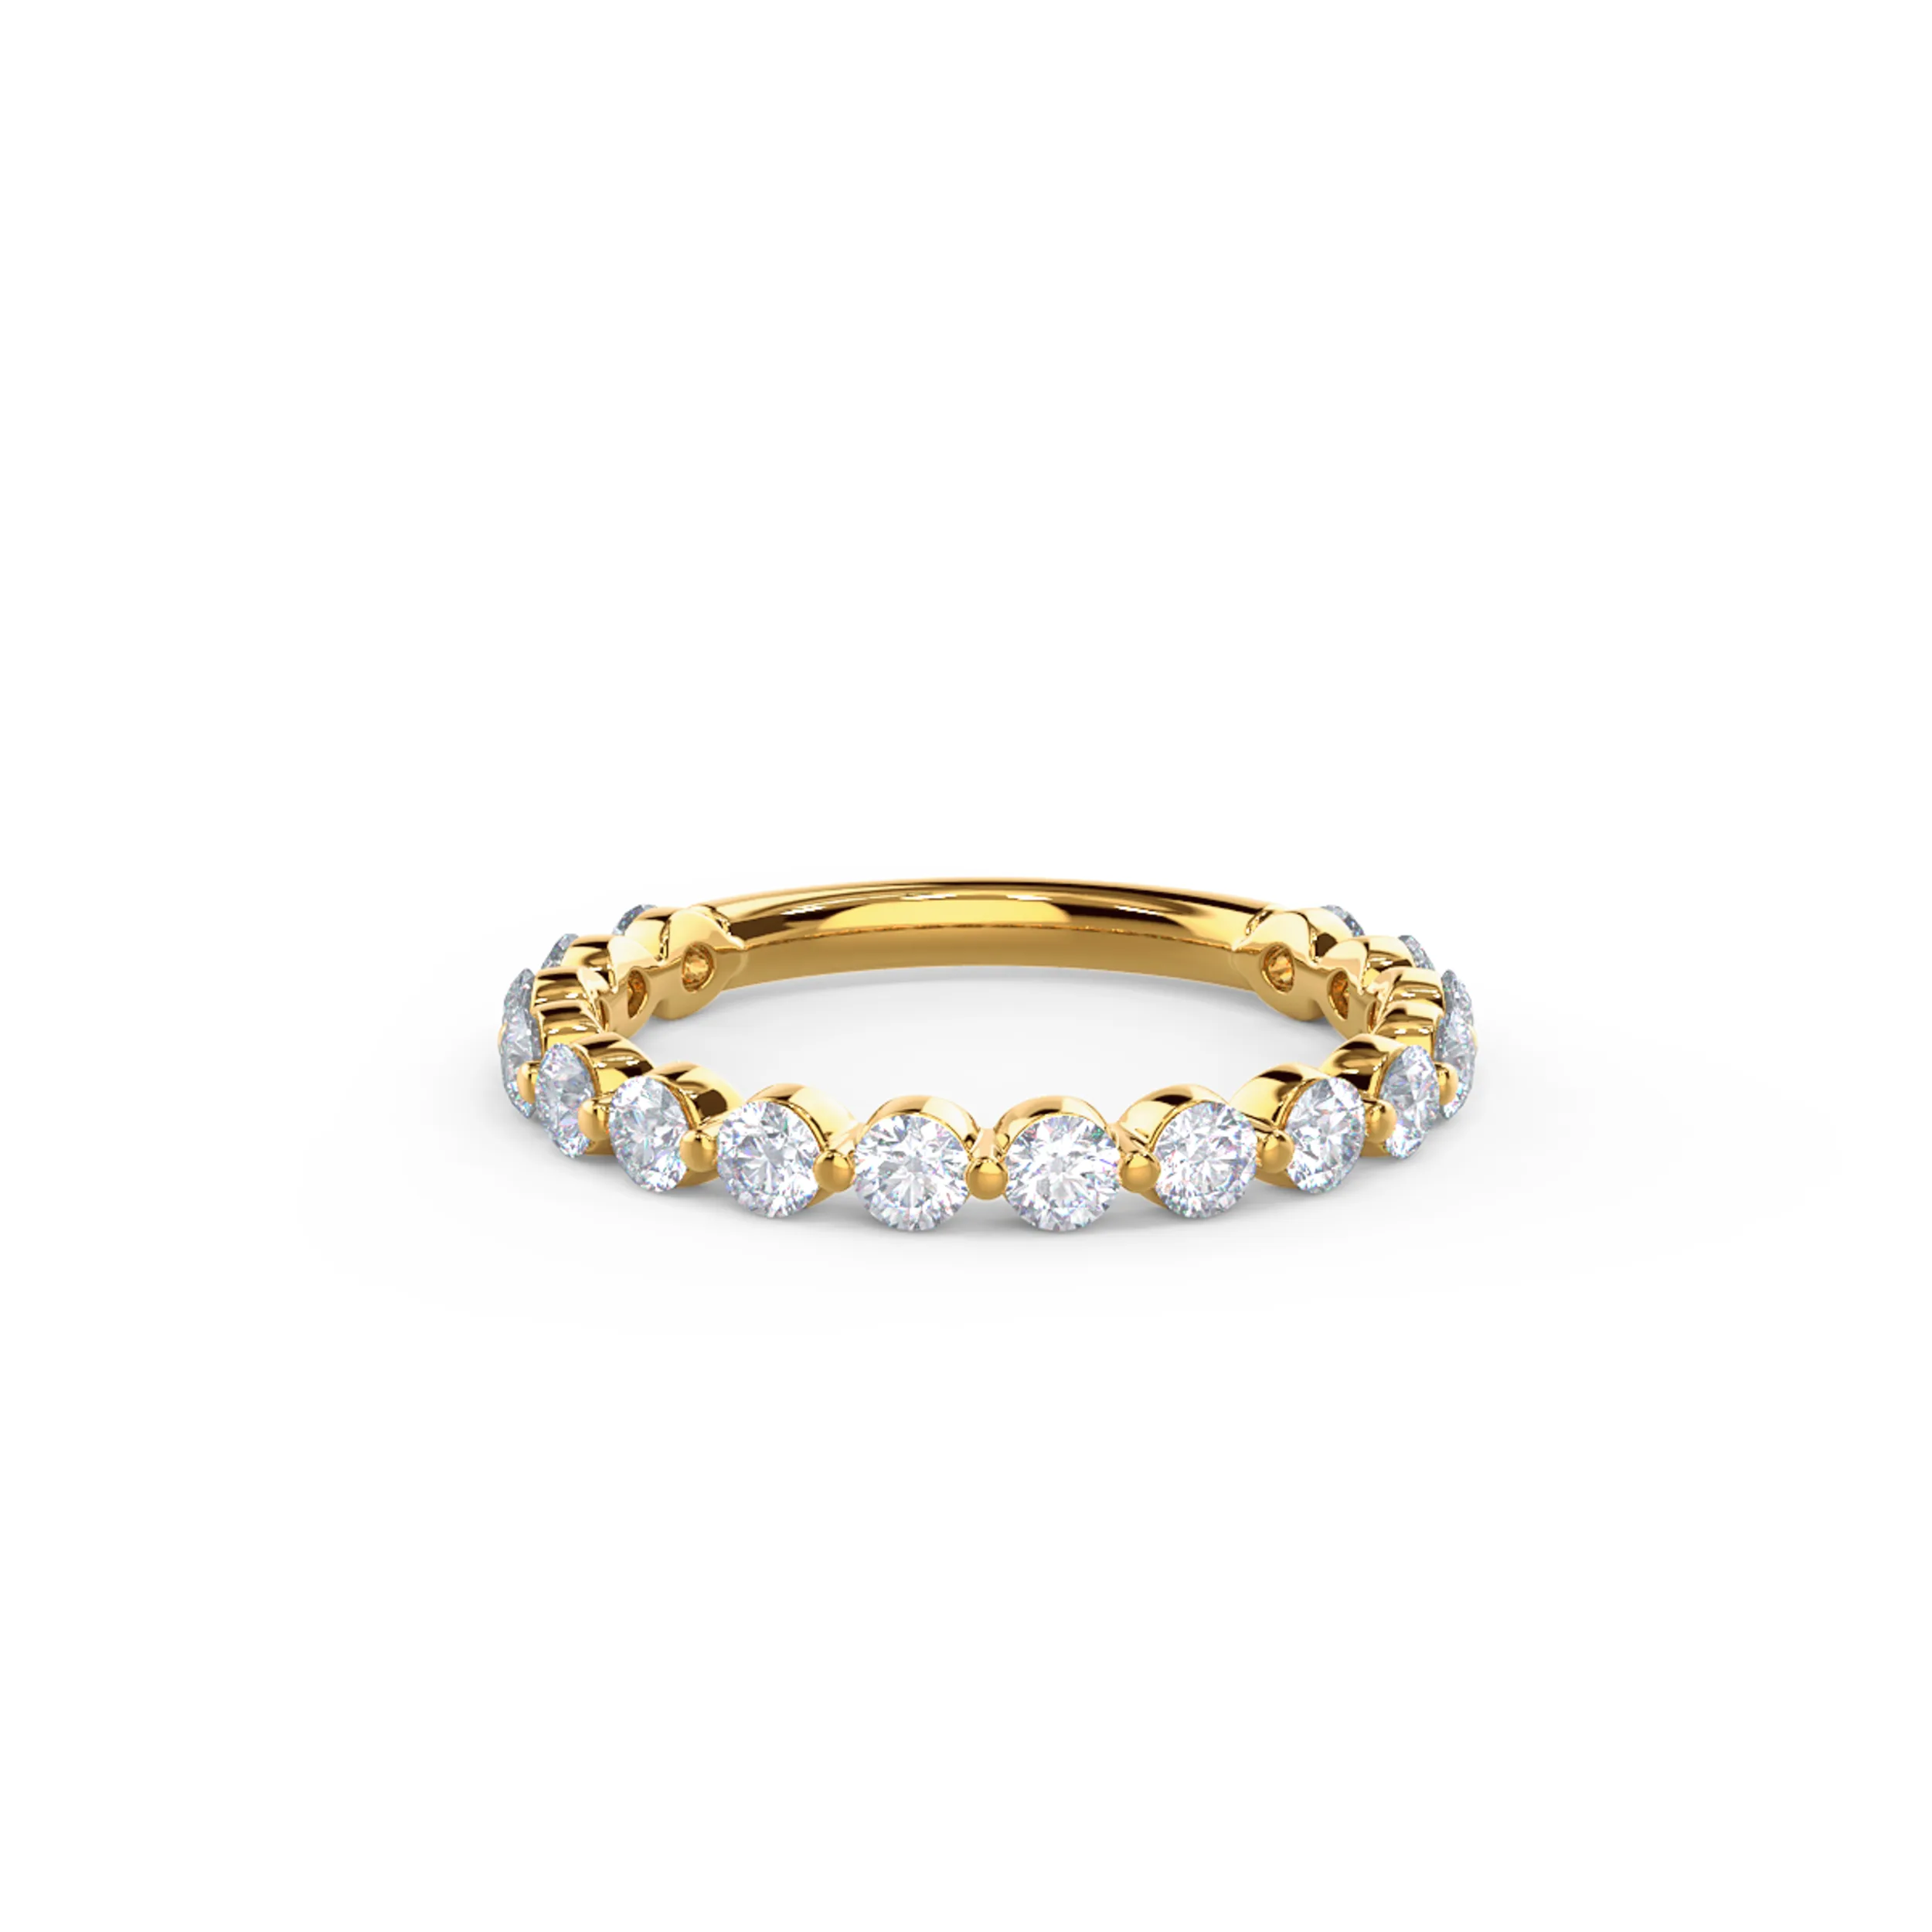 Exceptional Quality 0.8 Carat Round Diamonds Shared Prong Three Quarter Band in 18k Yellow Gold (Main View)